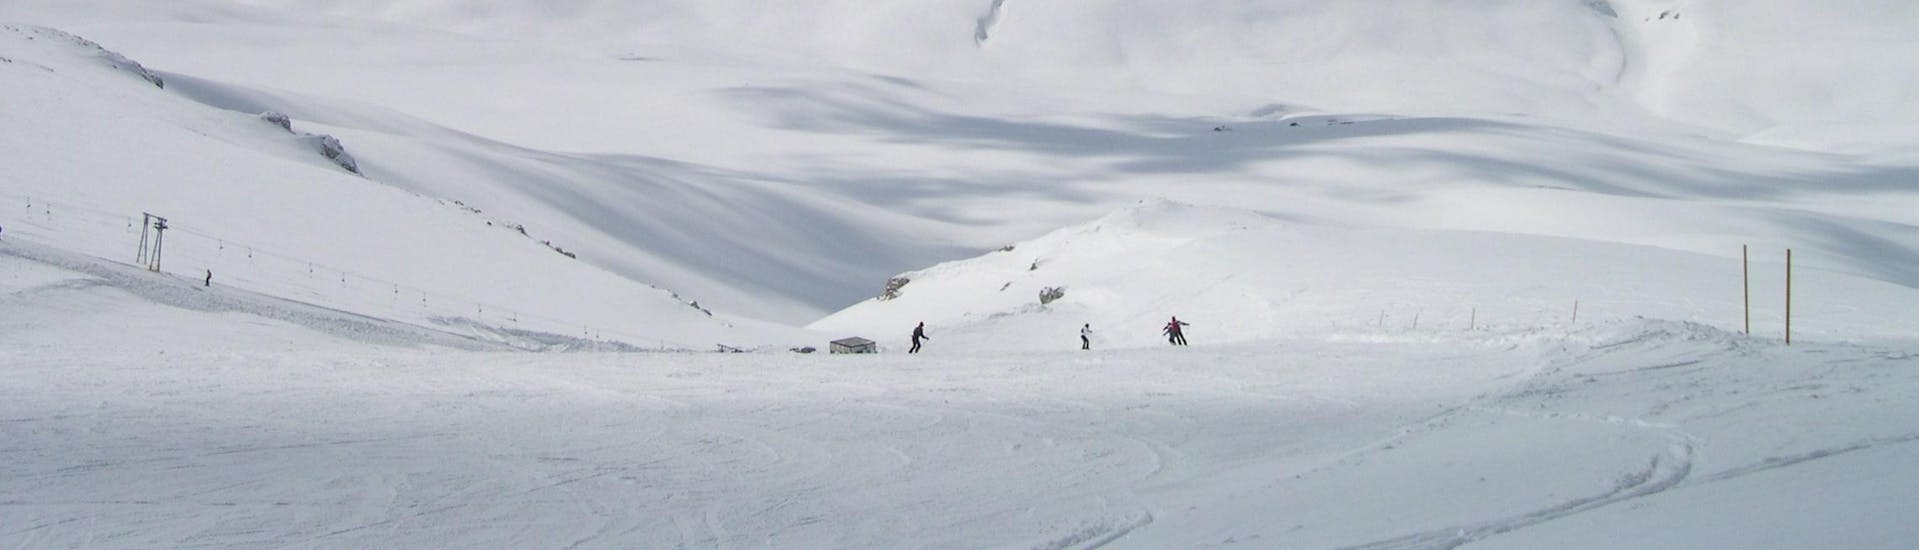 View of the slopes of Roccaraso ski resort, where local ski schools offer their ski lessons.